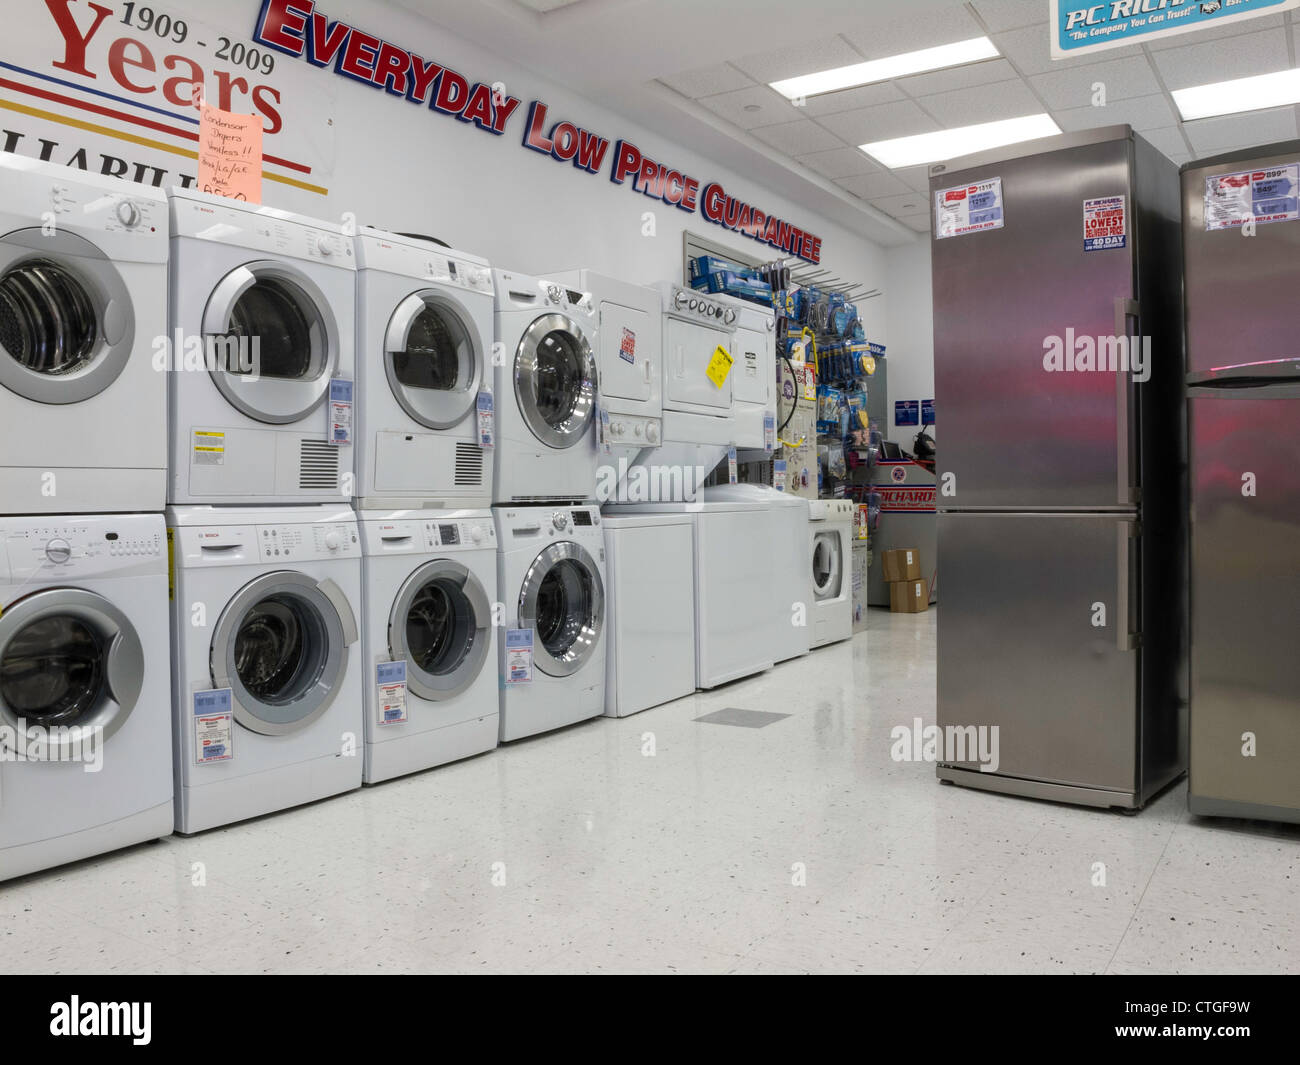 Washers, Dryers, Refrigerators For Sale in Appliance Store Stock Photo